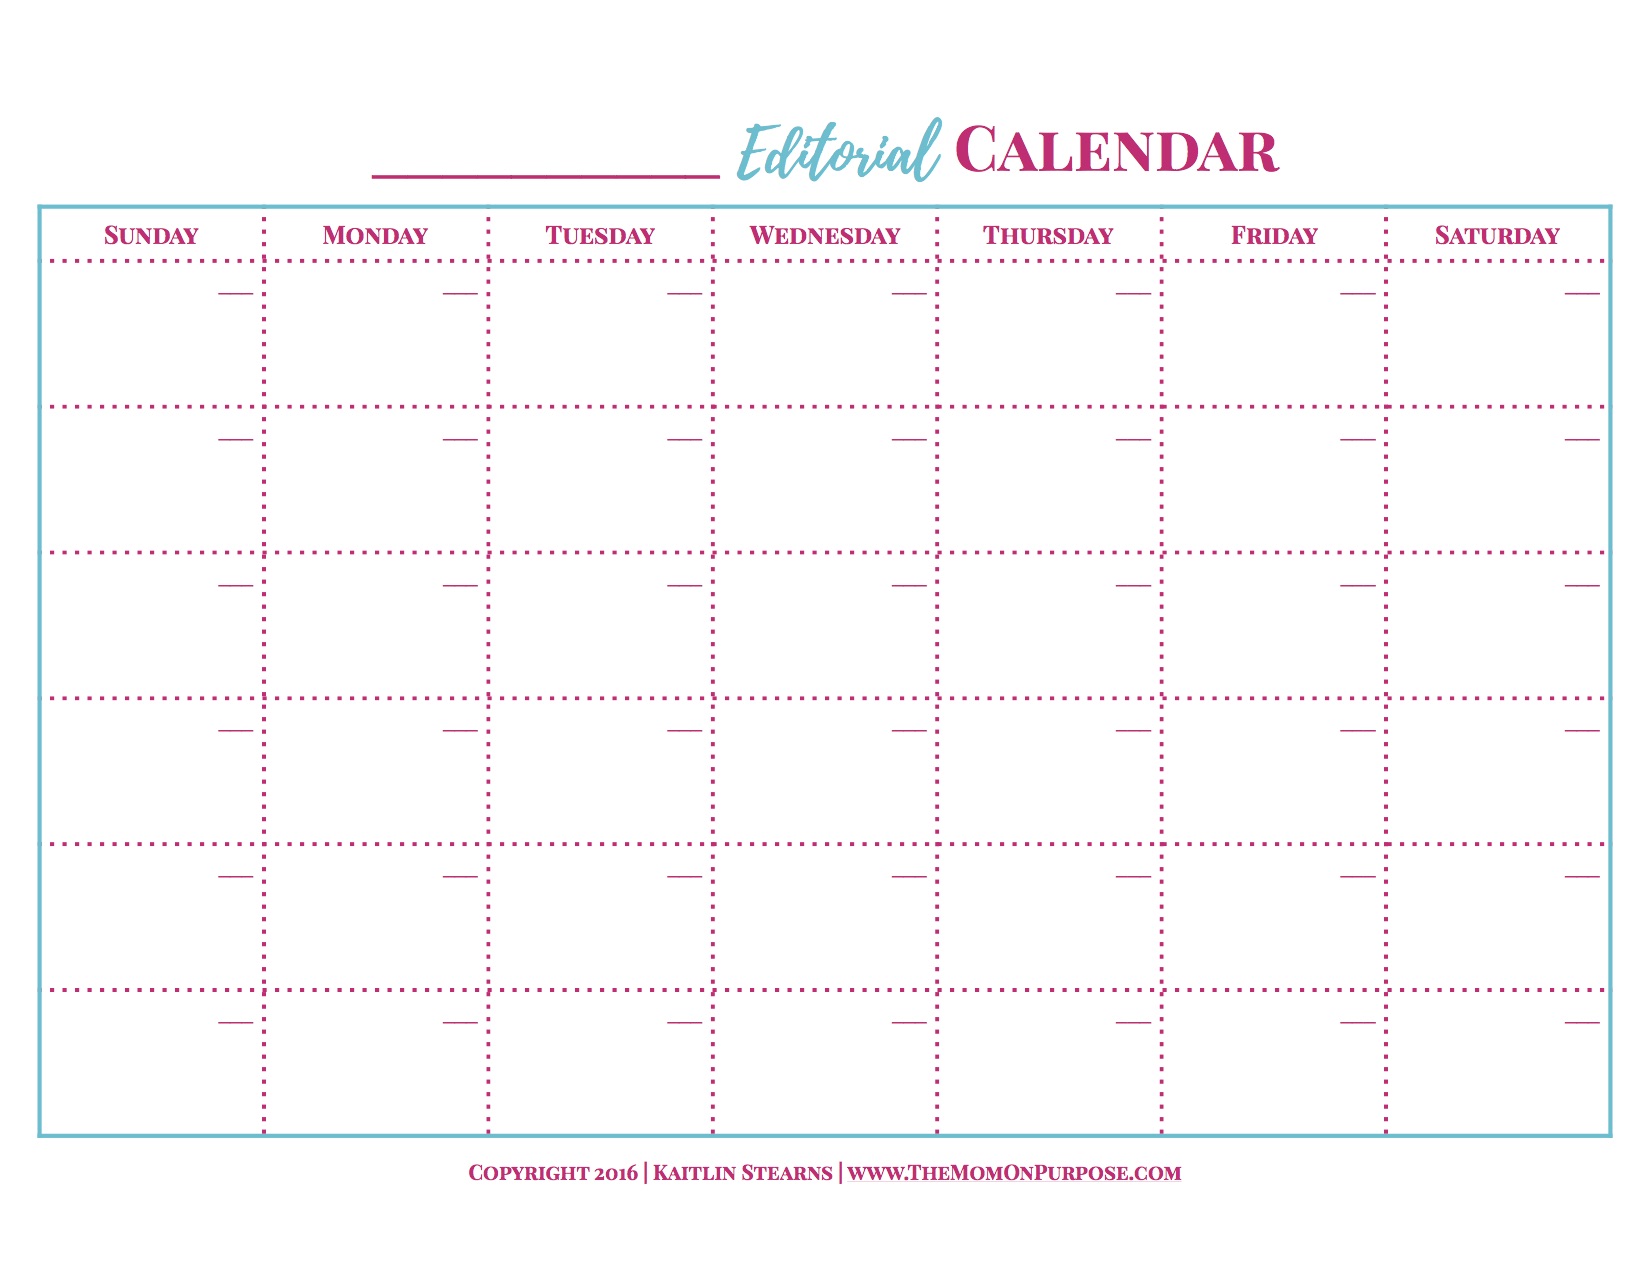 Monthly Editorial Calendar The Simply Organized Home